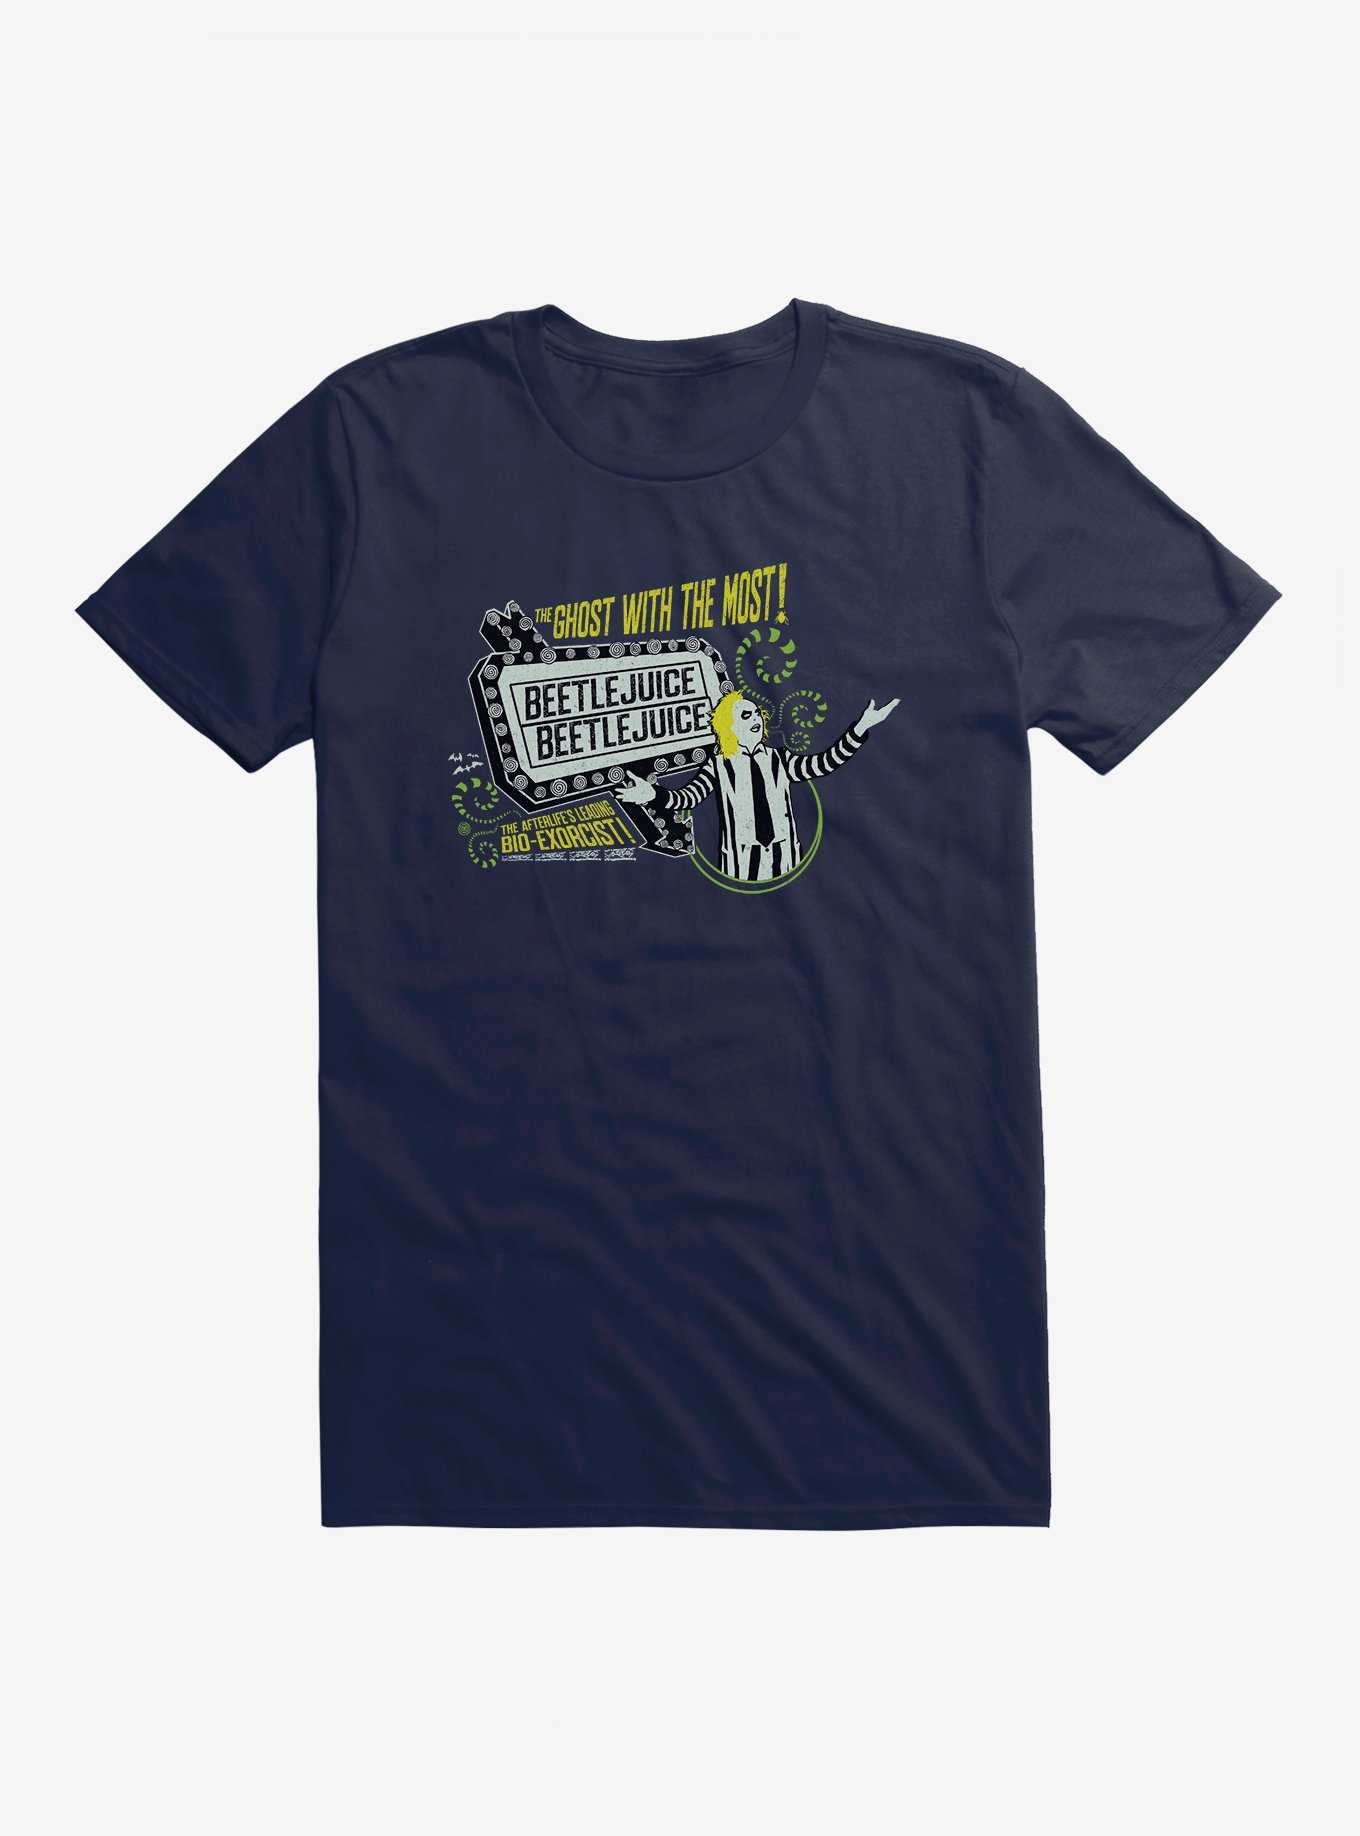 Beetlejuice Ghost With Most T-Shirt, , hi-res